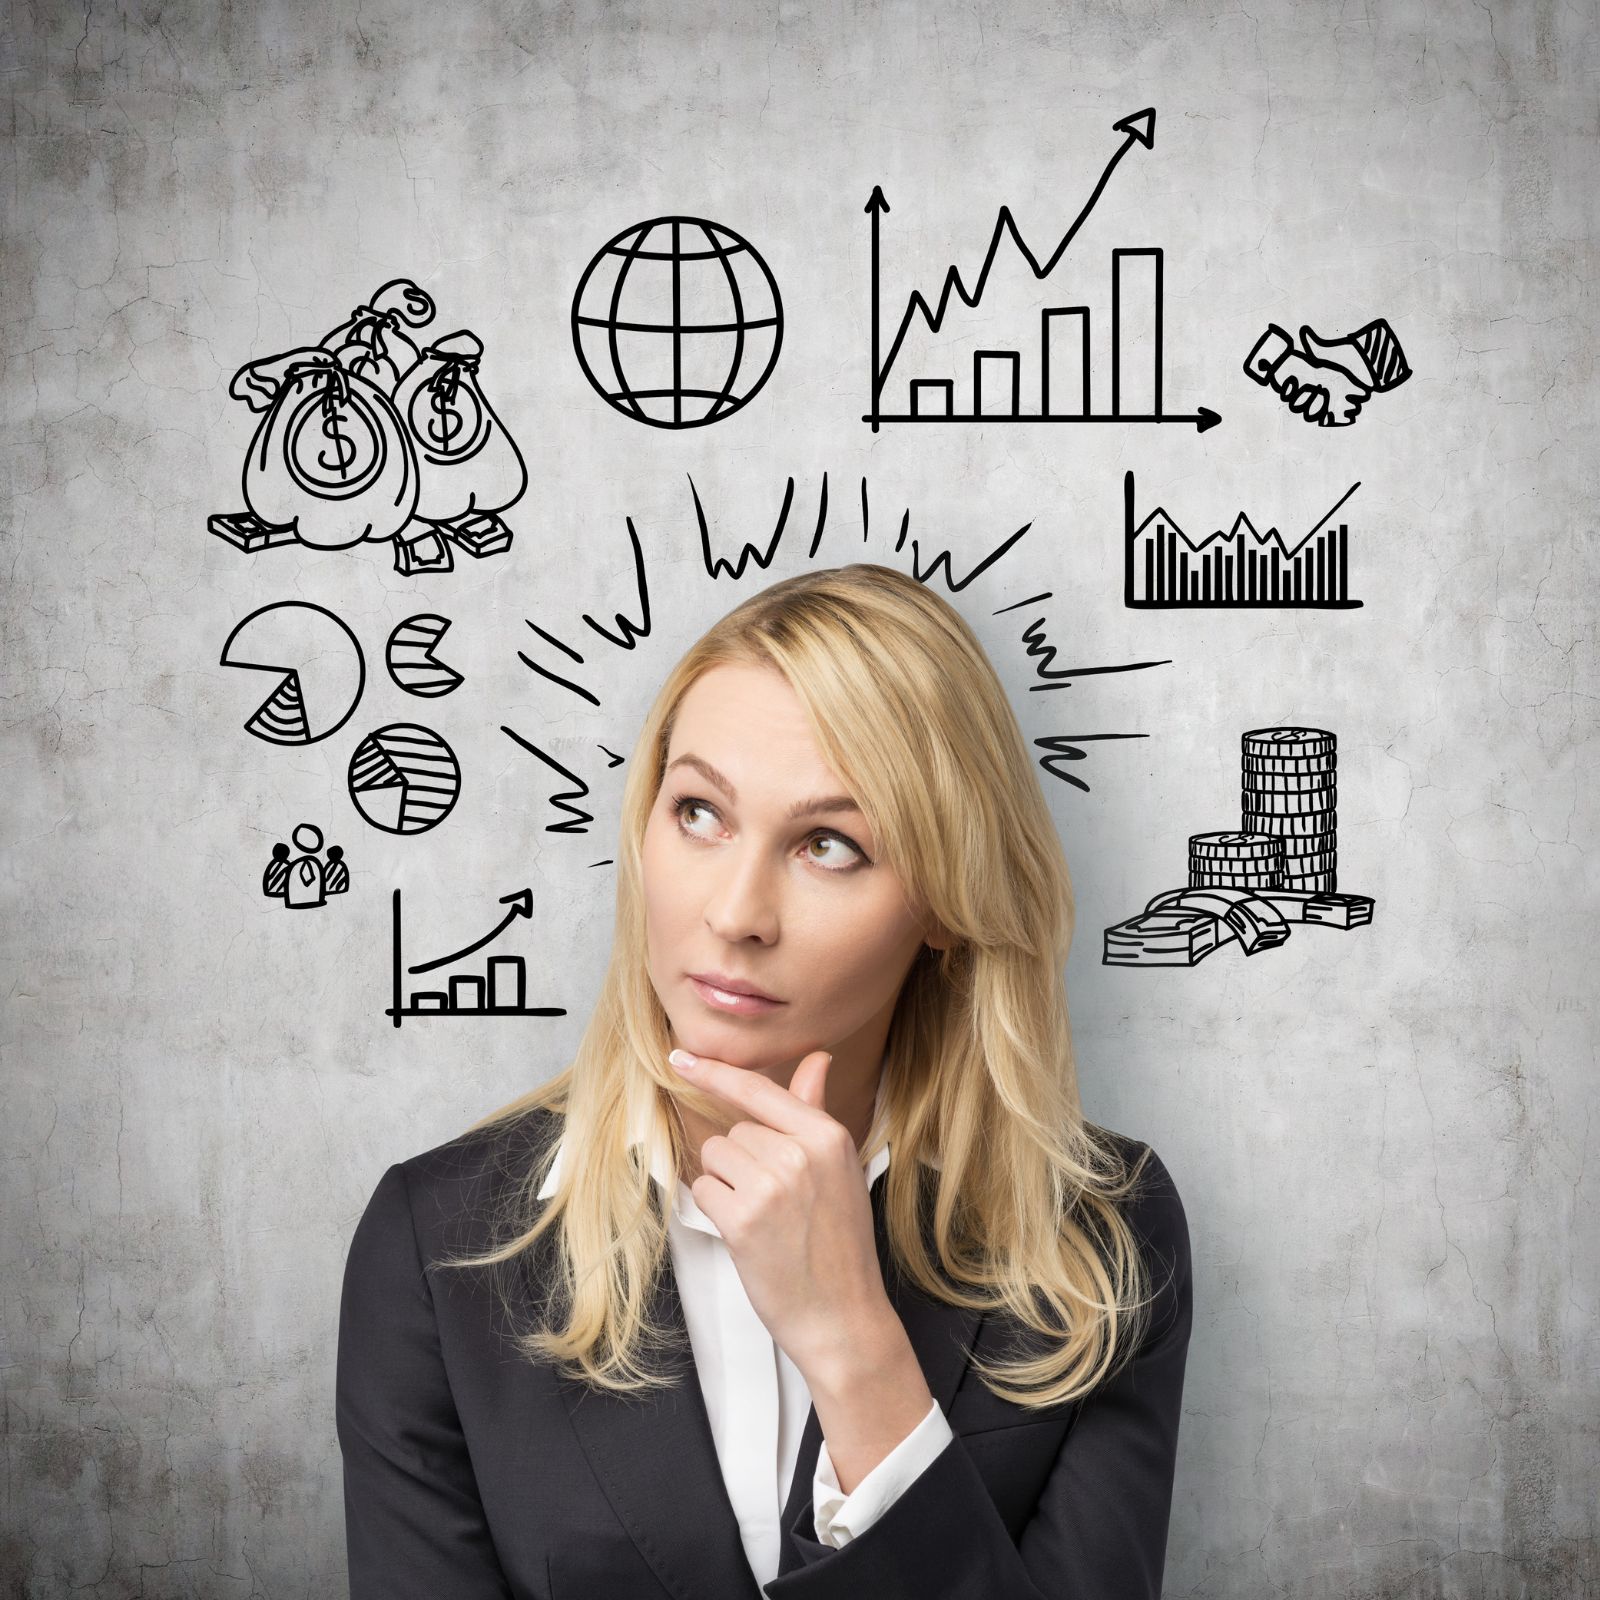 Cover image for law firm business development ideas post - woman thinking with graphics above her head